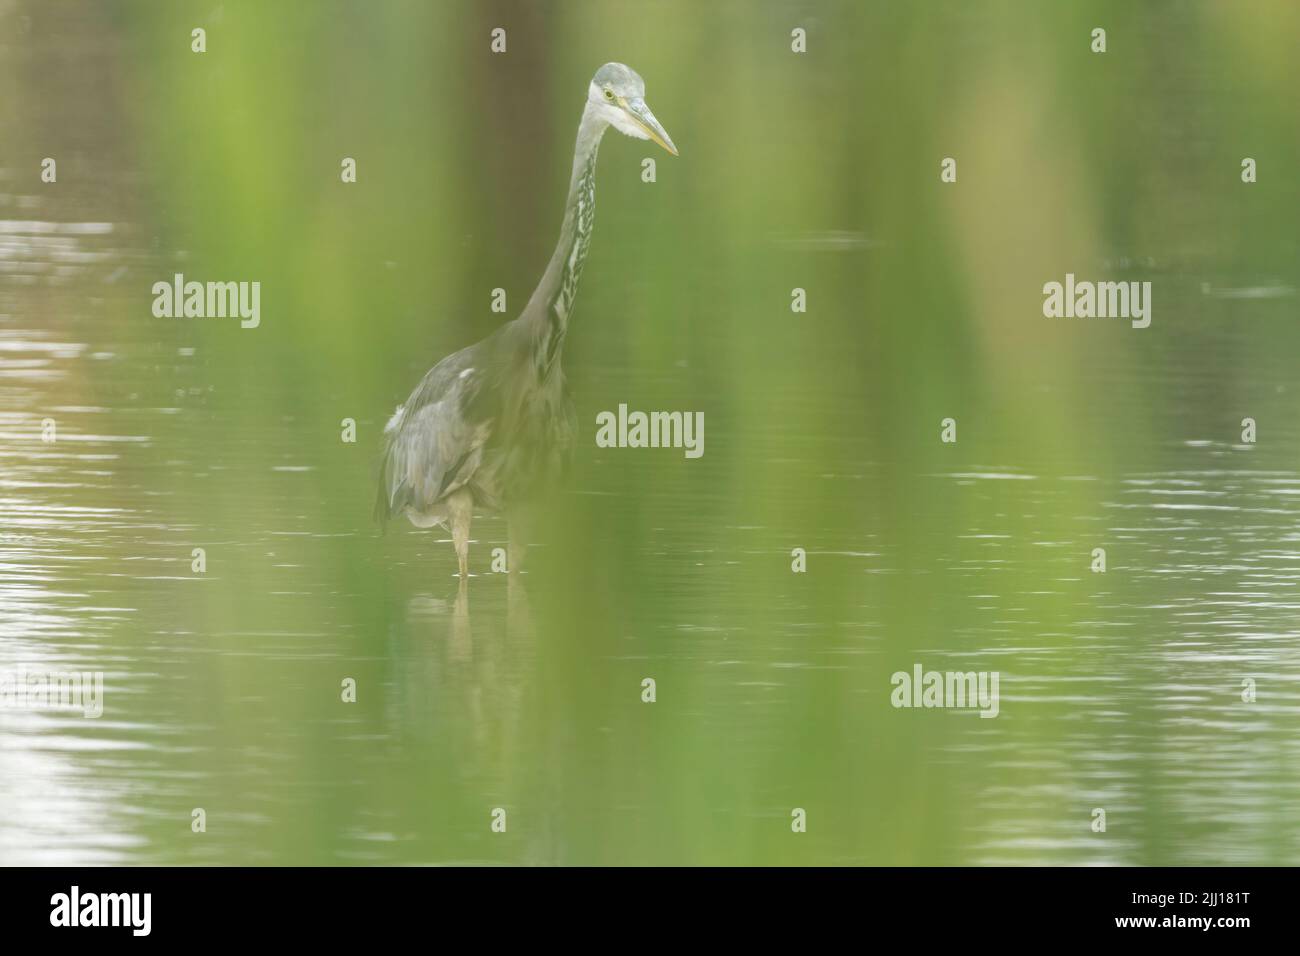 Grey heron Ardea cinerea Long neck and legs long dagger like bill blue grey back and wings whitish head neck underparts black streaks neck and breast Stock Photo